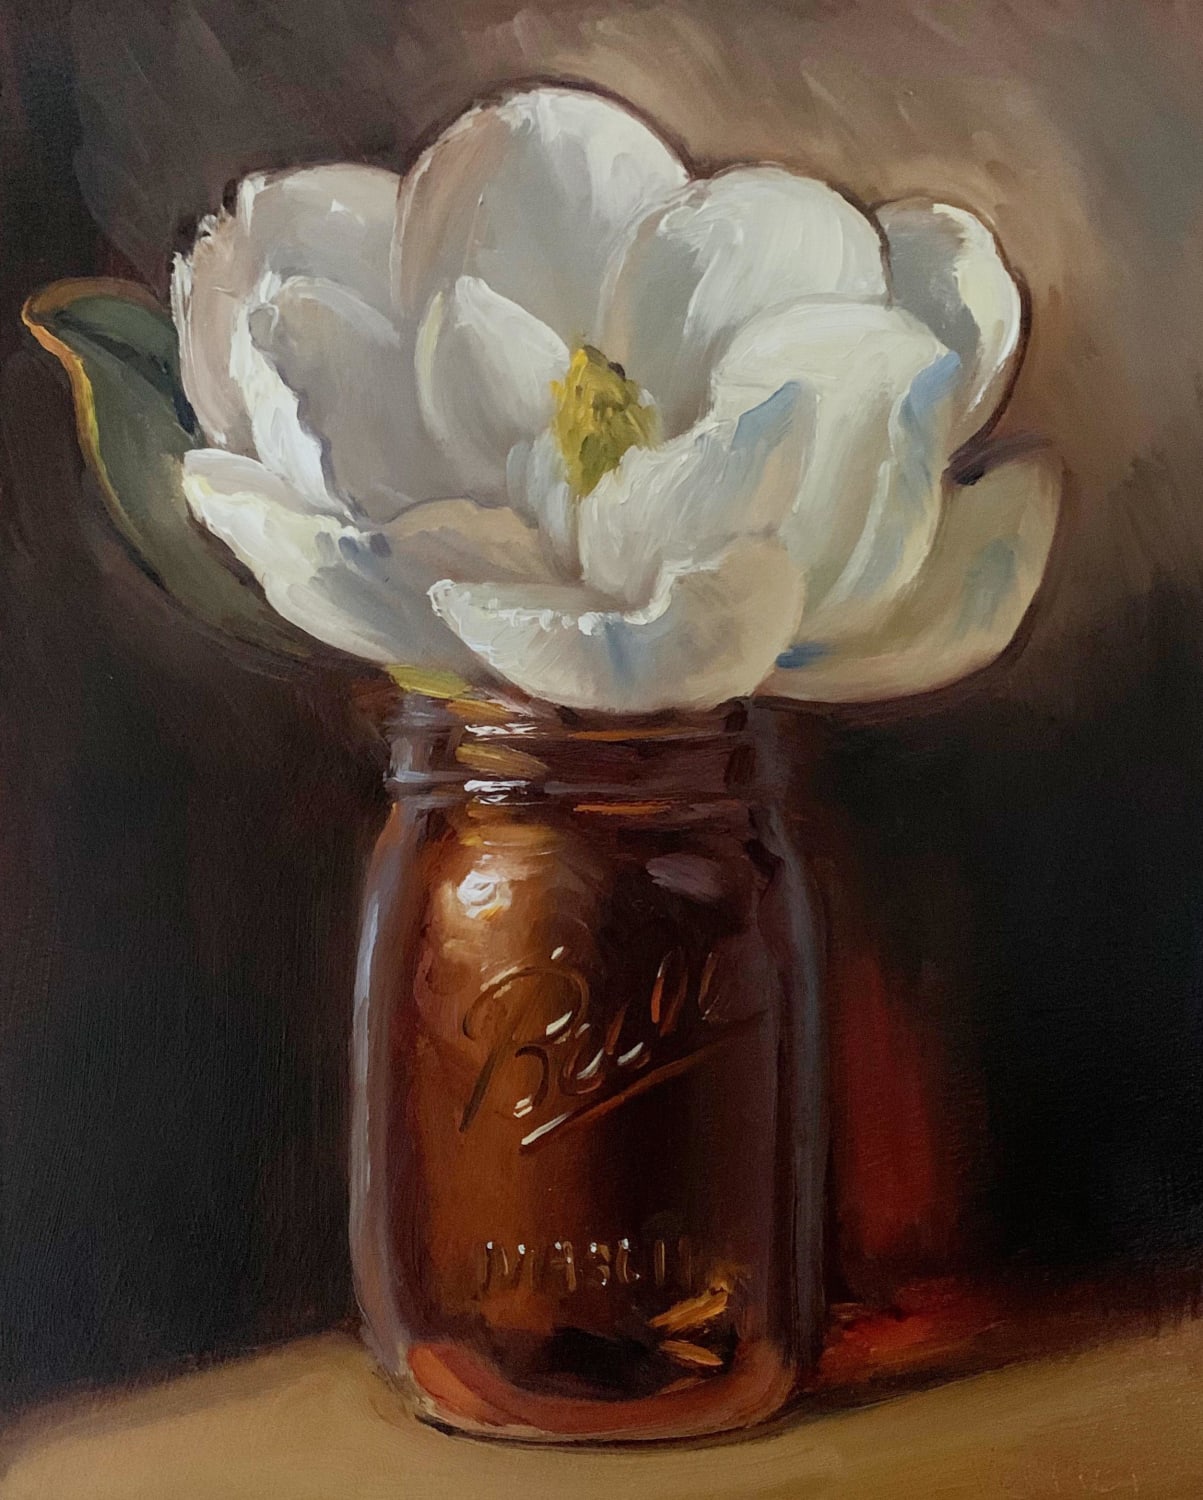 Magnolia in Amber Jar - Oil painting by me